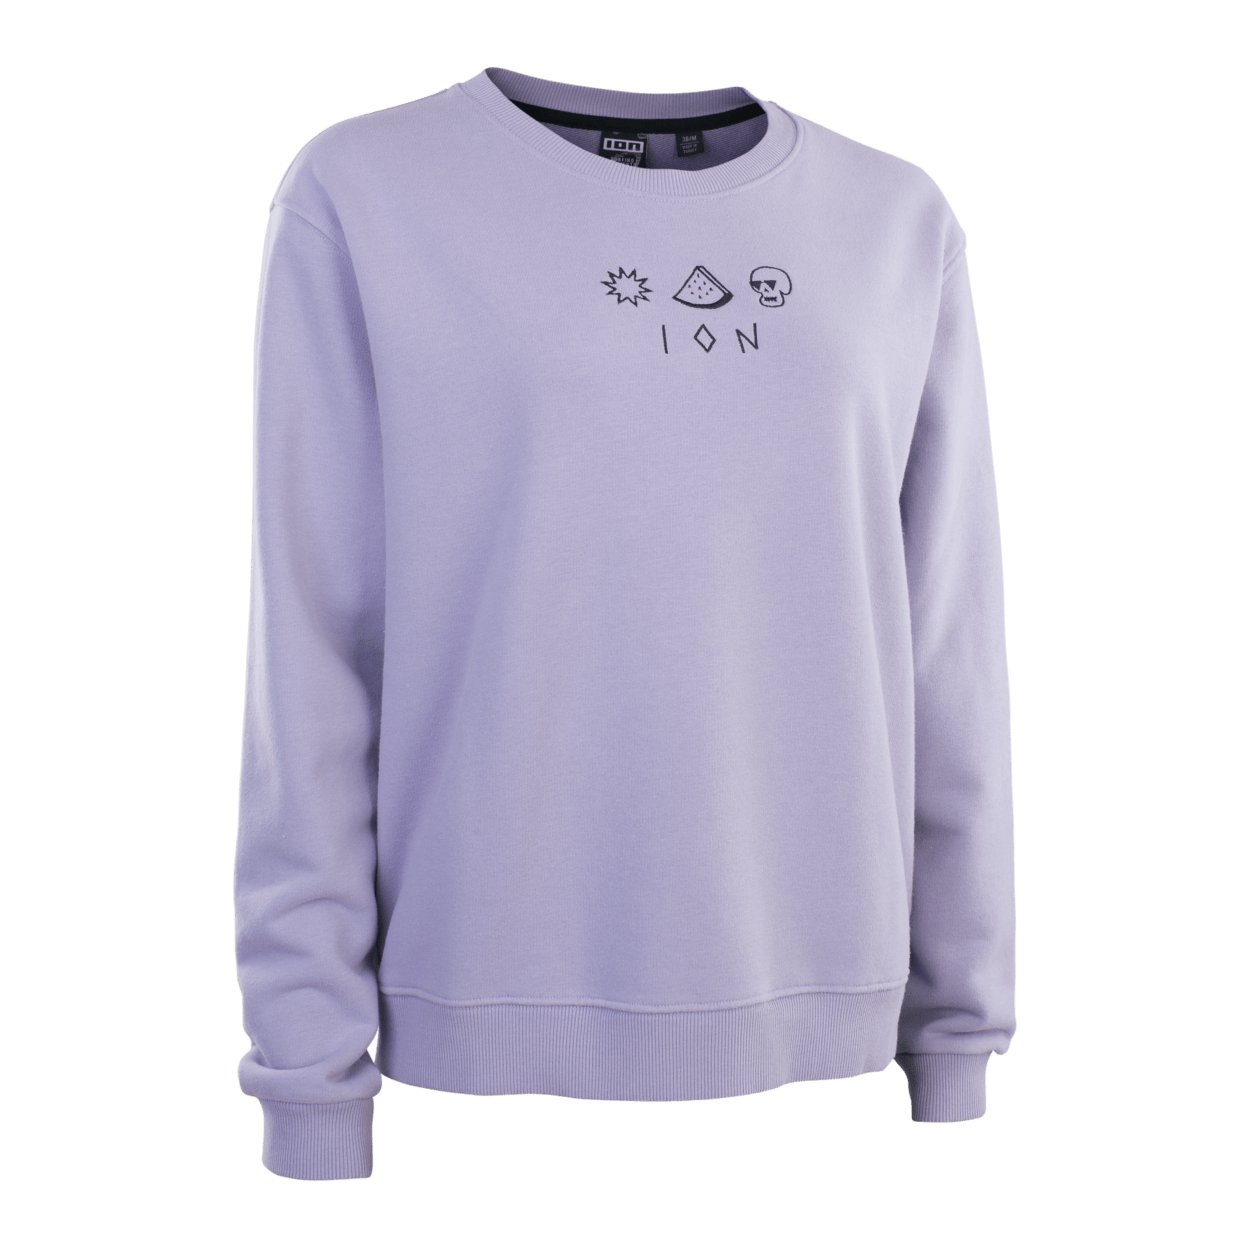 ION Sweater No Bad Days women 2023 - Worthing Watersports - 9010583105093 - Apparel - ION Water